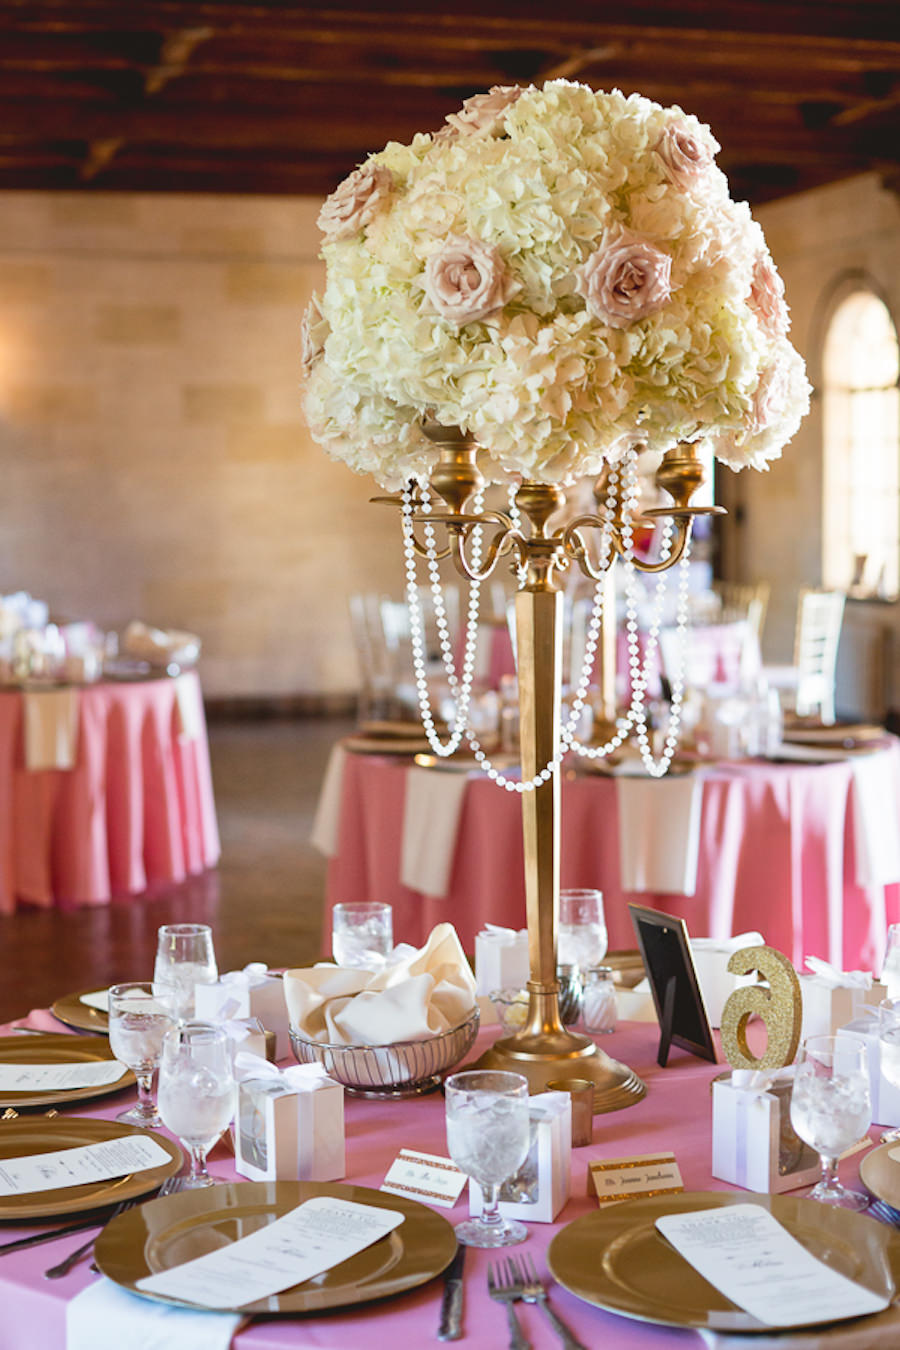 Gold Wedding Reception Decor with Tall Gold Centerpieces and Blush Pink Linens | Wedding Reception Decor Ideas and Inspiration